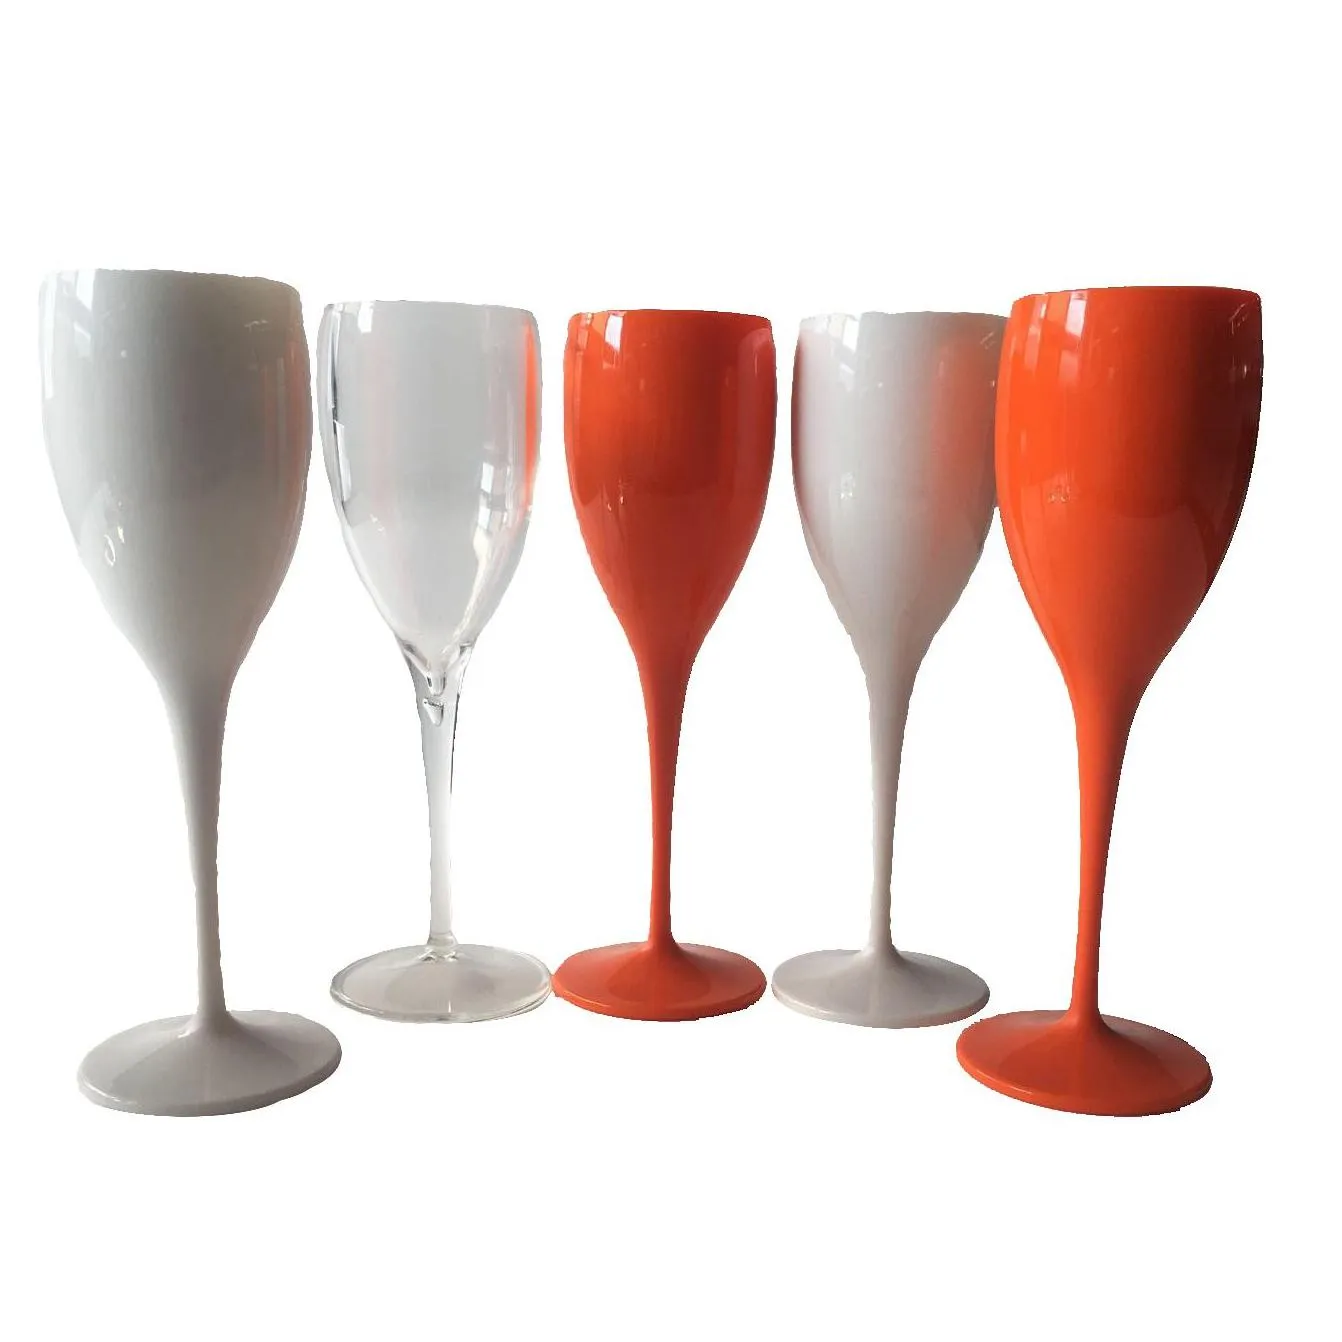 moet cups acrylic unbreakable champagne wine glass plastic orange white moet chandon wine glass ice imperial wine glasses goblet